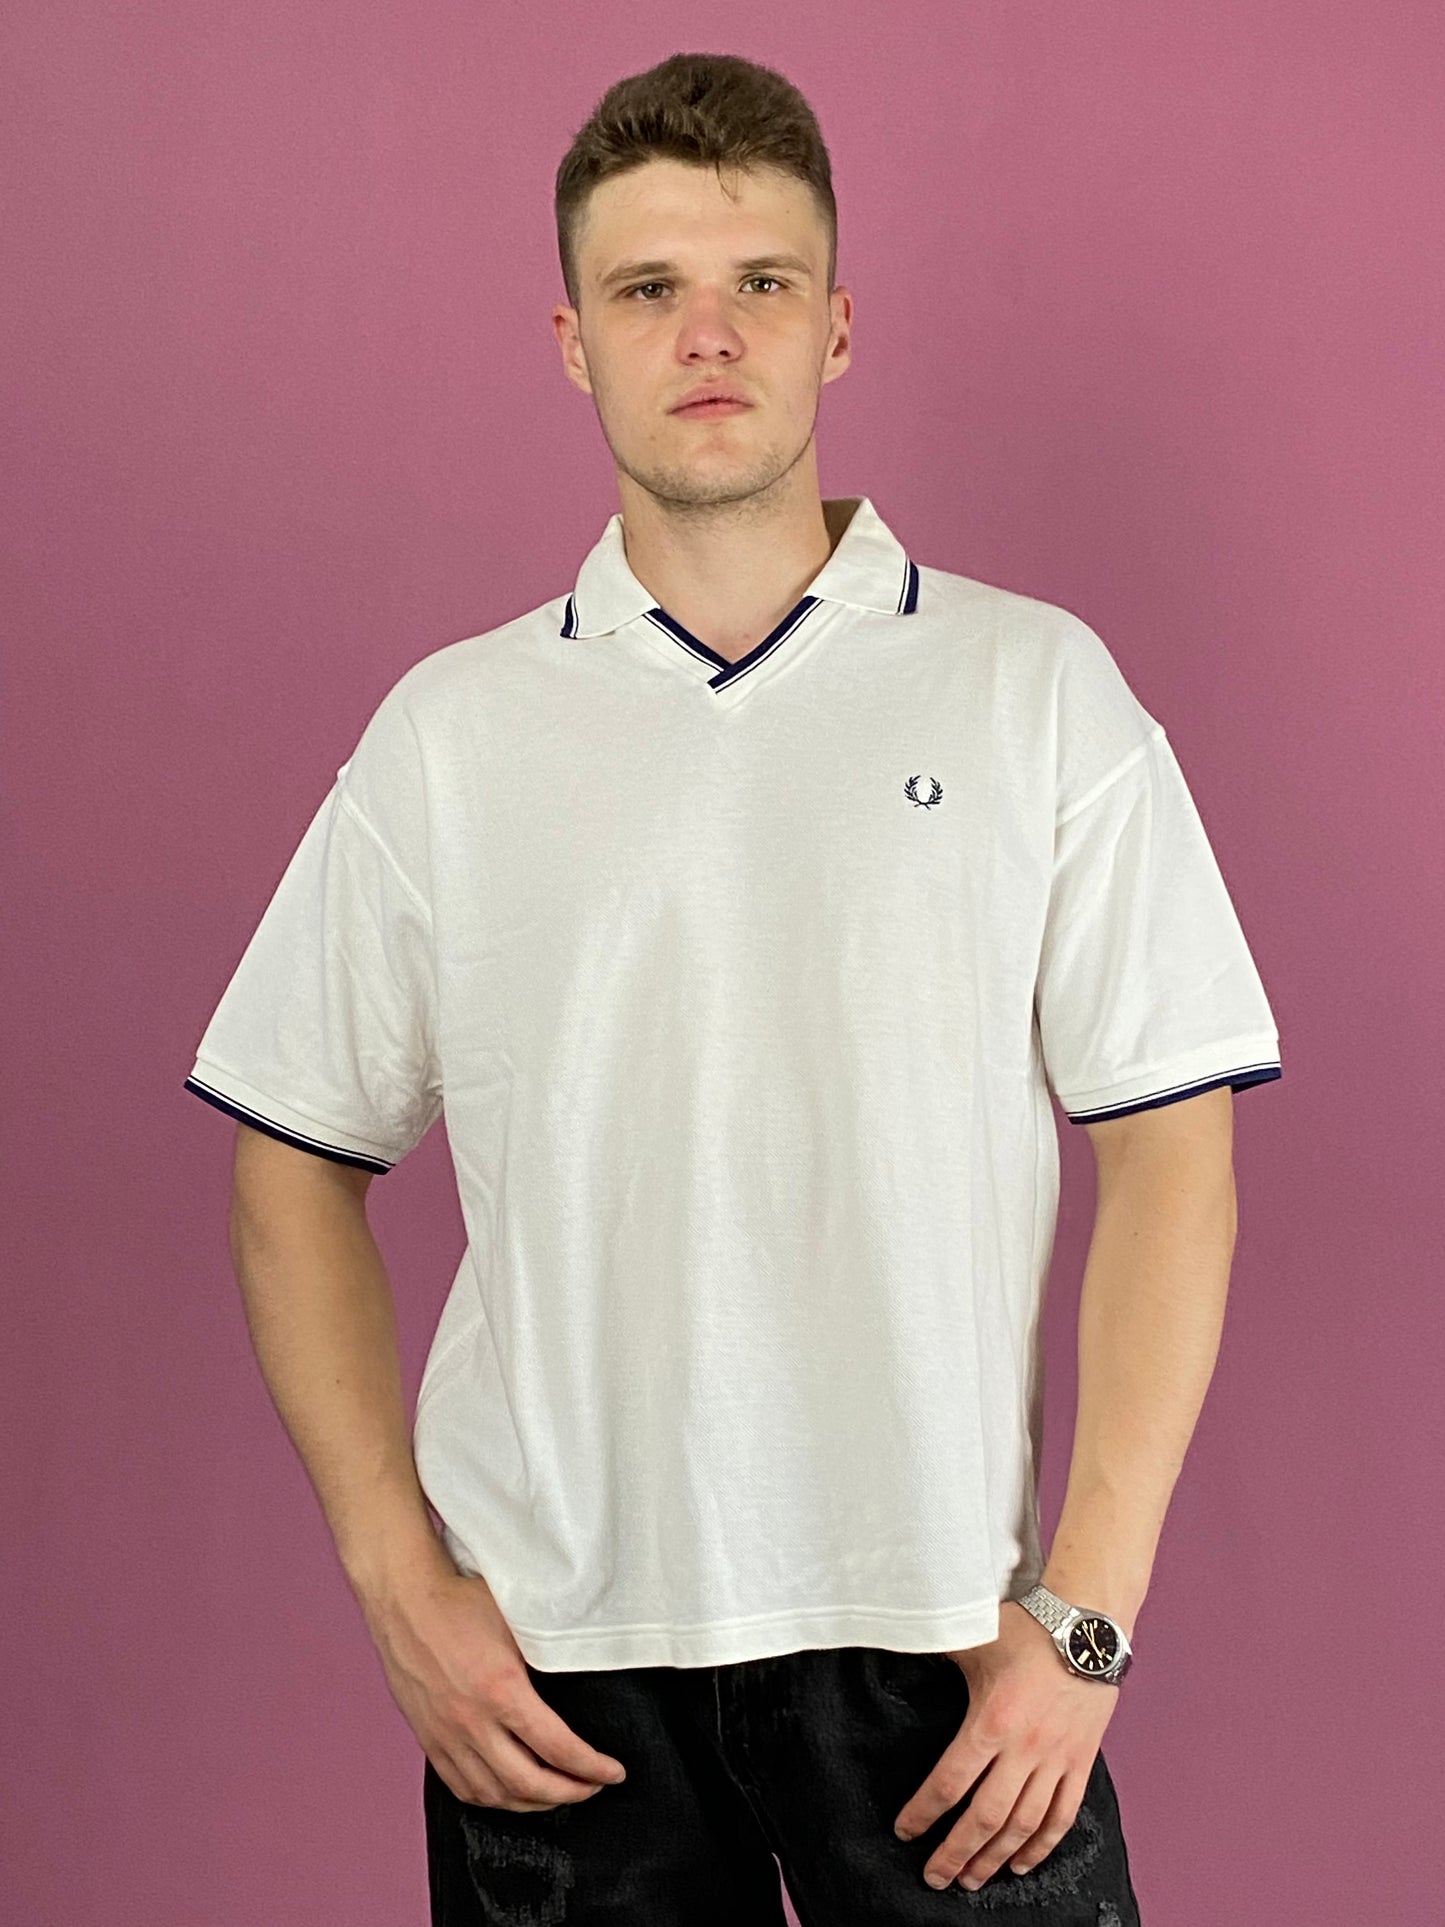 90s Fred Perry Vintage Men's Polo Shirt - Large White Cotton